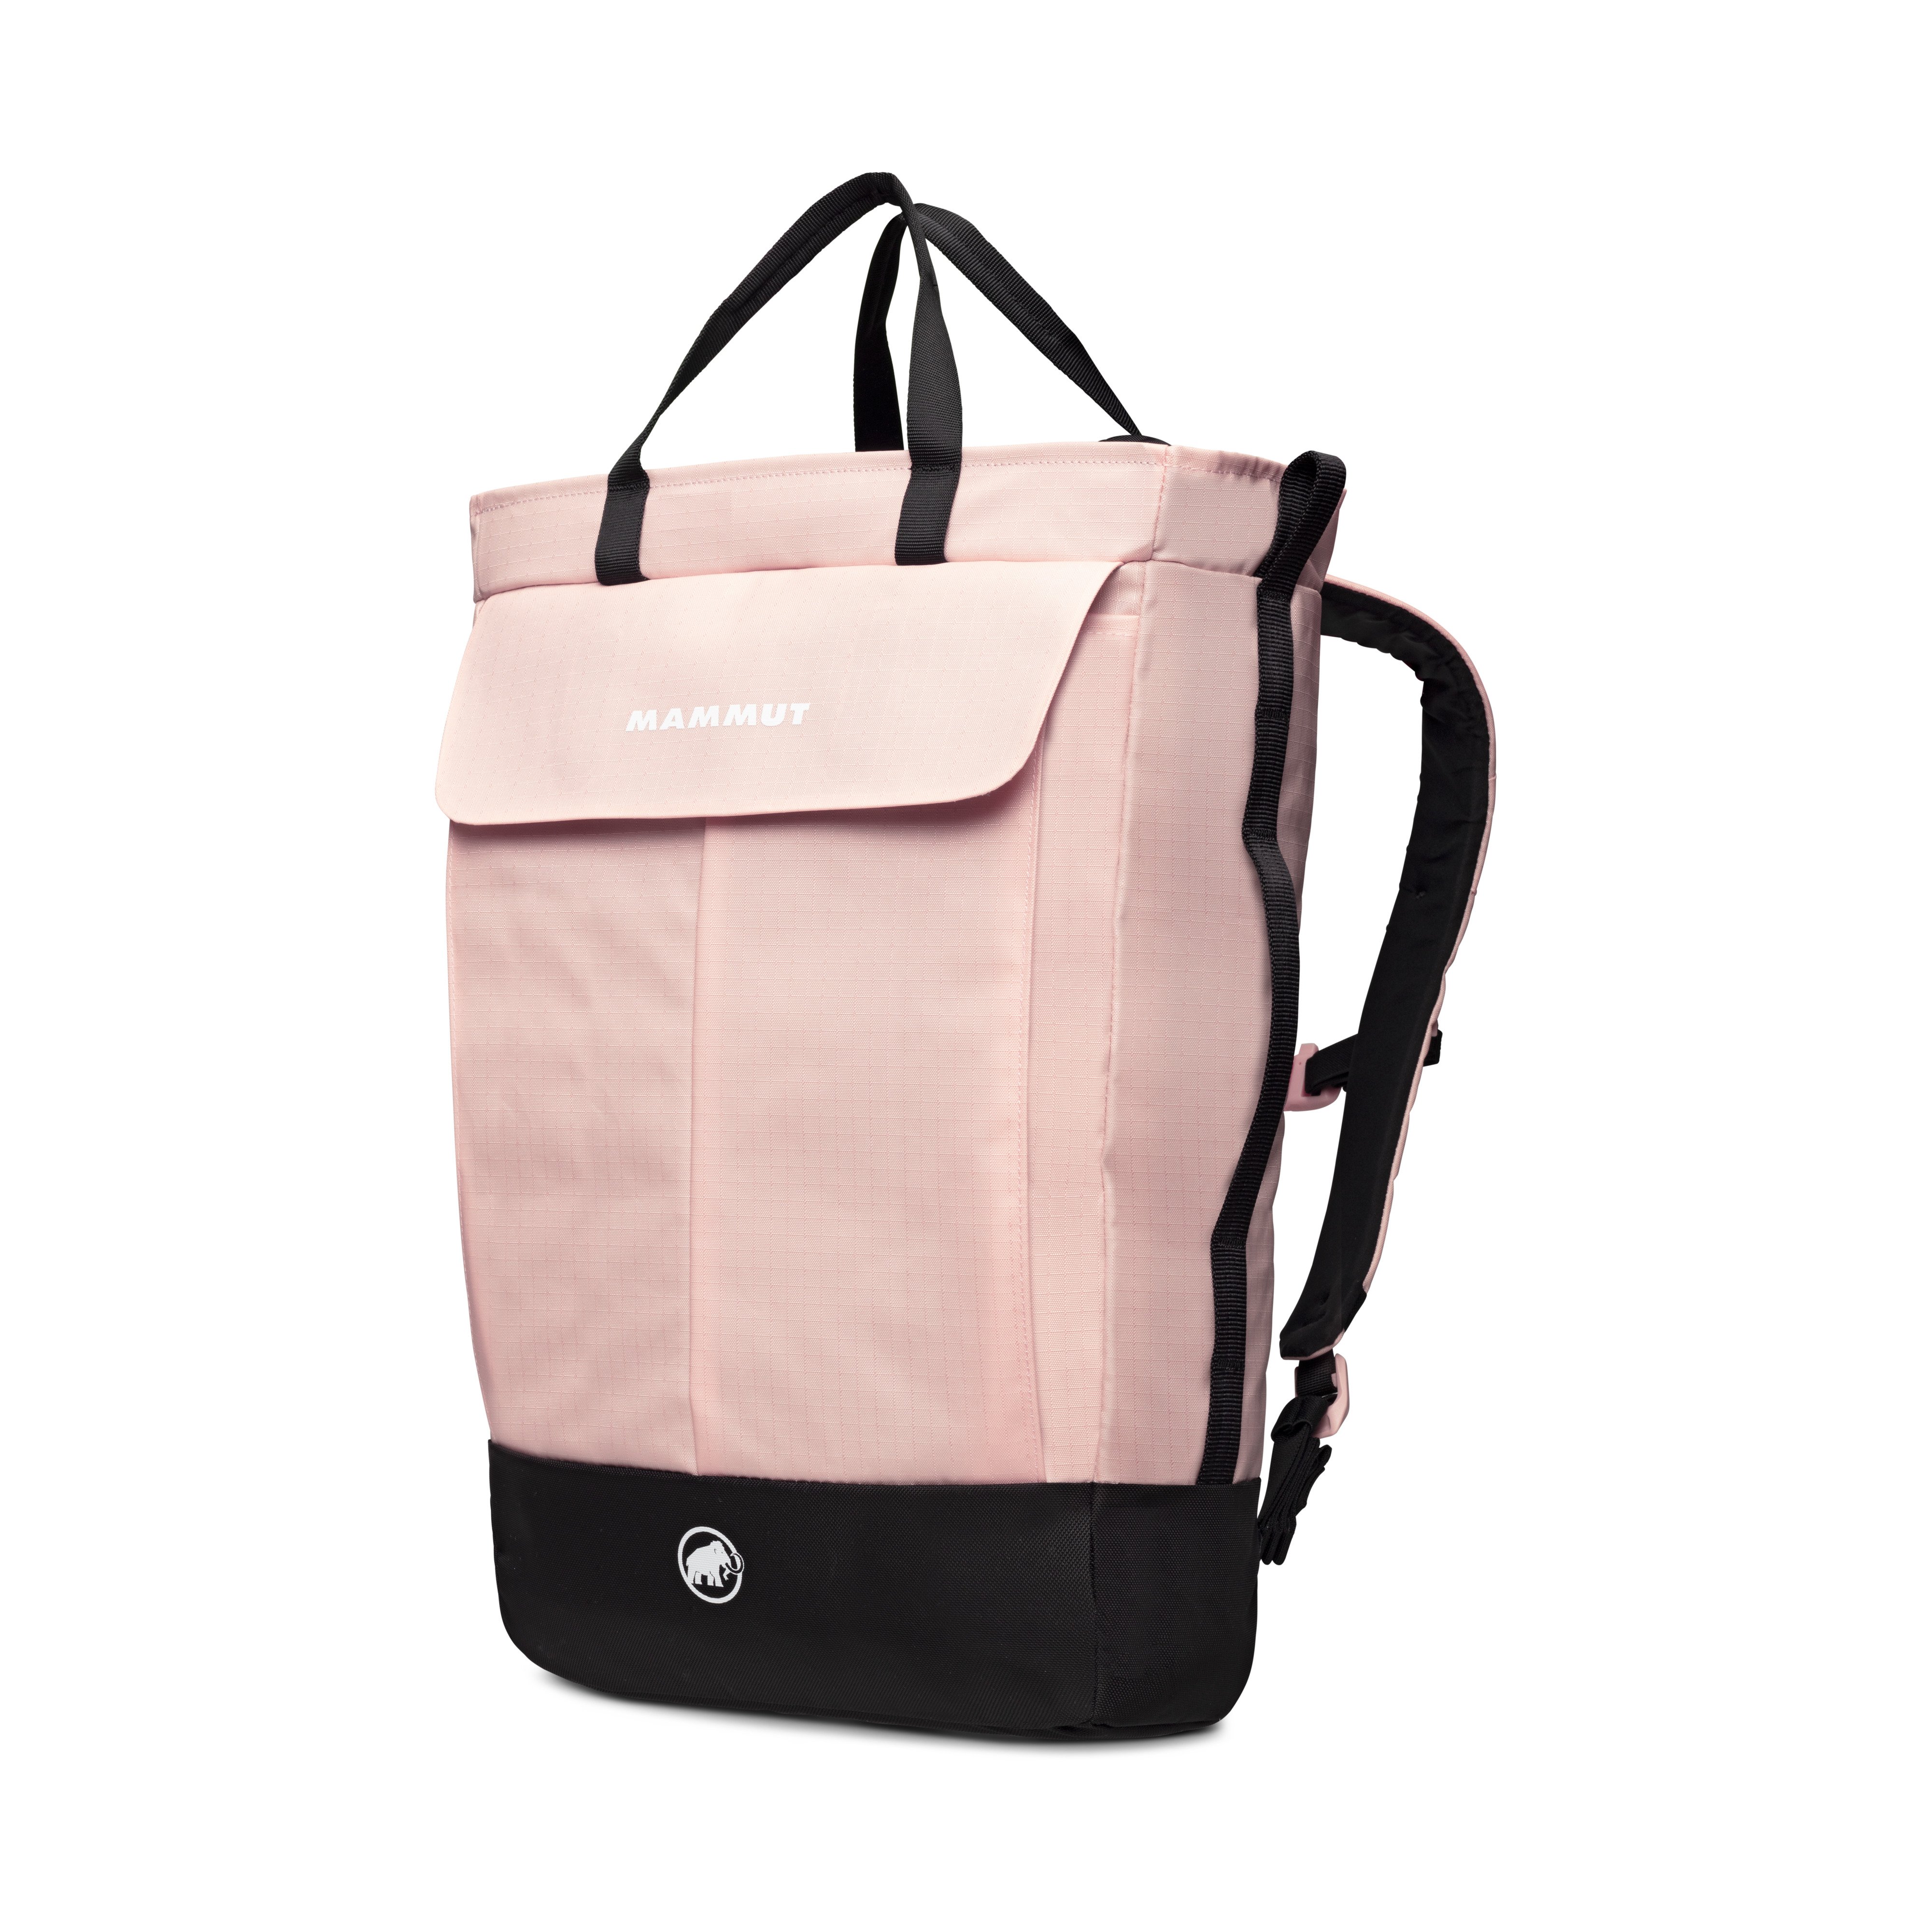 Neon Shuttle S - candy-black, 22 L product image